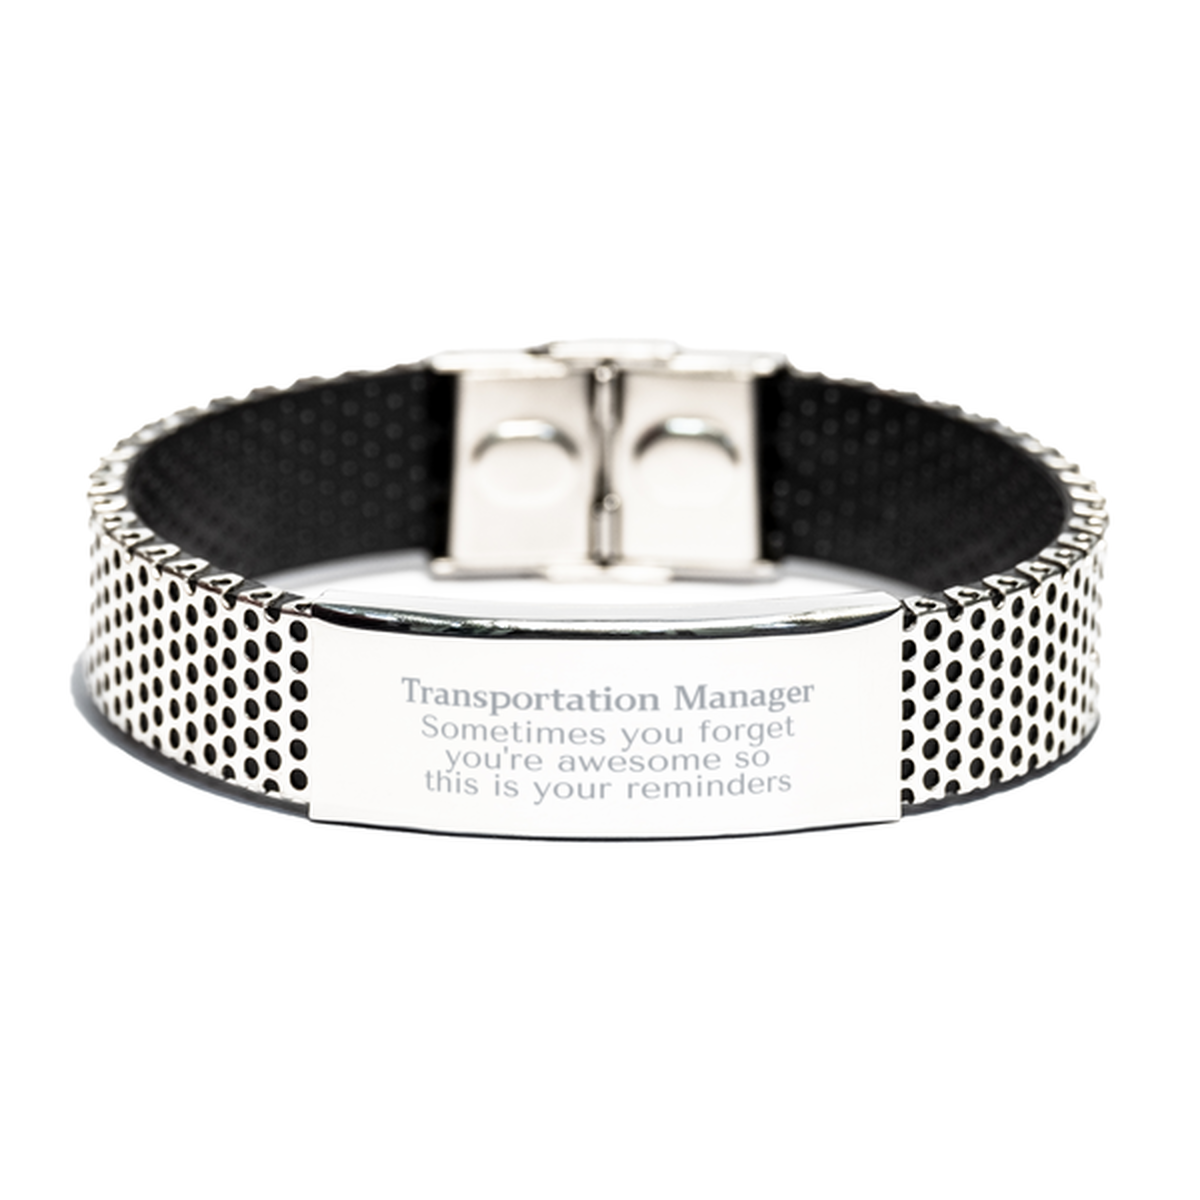 Sentimental Transportation Manager Stainless Steel Bracelet, Transportation Manager Sometimes you forget you're awesome so this is your reminders, Graduation Christmas Birthday Gifts for Transportation Manager, Men, Women, Coworkers